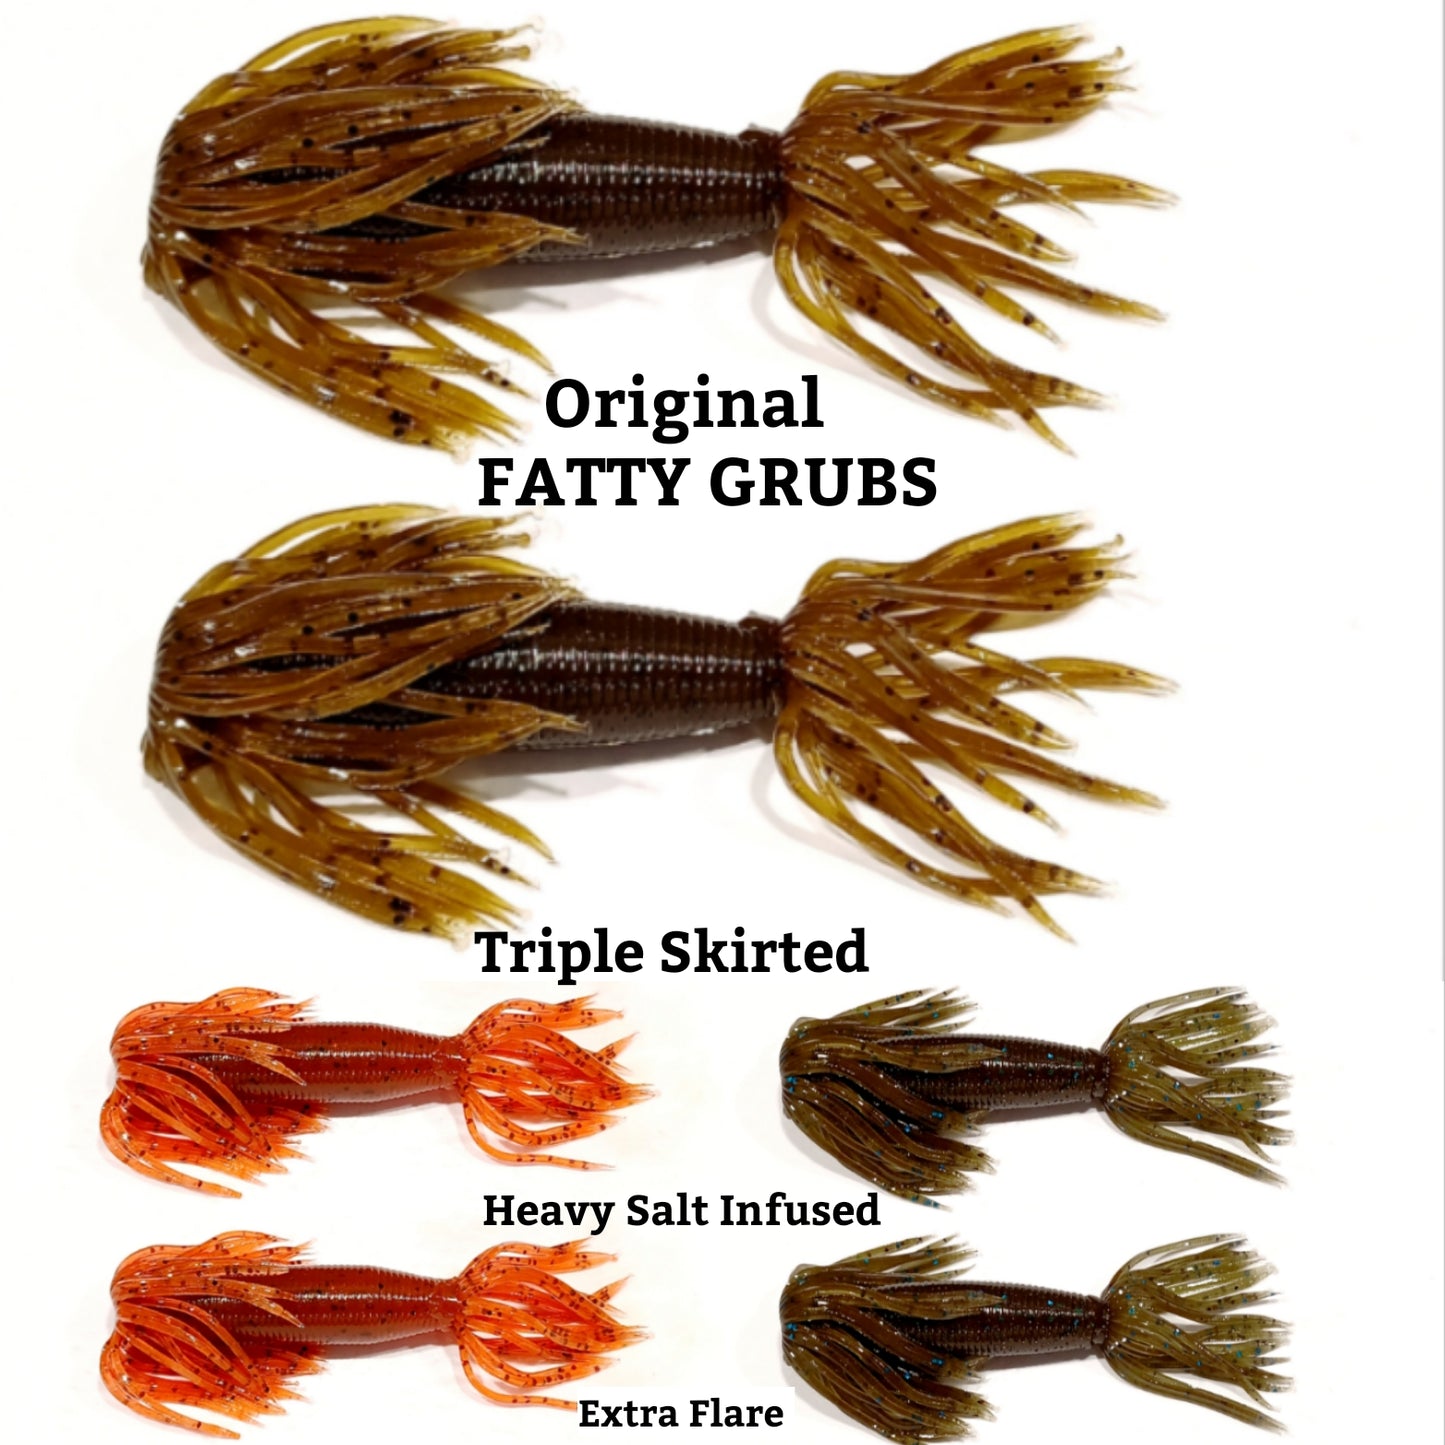 ORIGINAL FATTY GRUB (triple skirt) variety of colors available